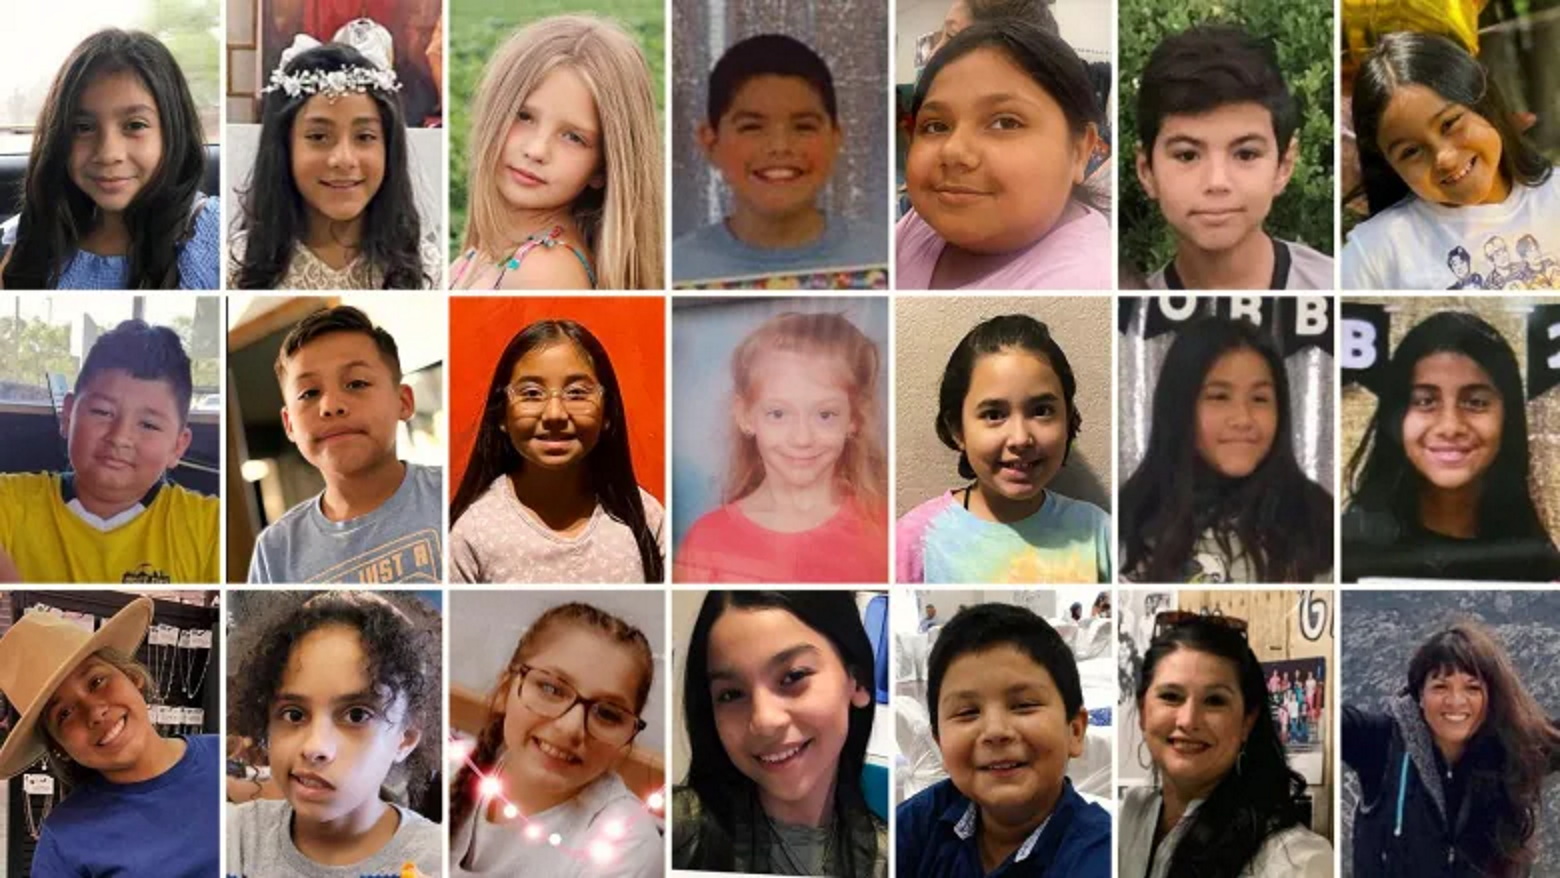 Composite illustration features the 21 victims — including 19 children and two teachers — of a mass shooting at Robb Elementary School in Uvalde, Texas, on 24 May 2022. Photo: Reuters